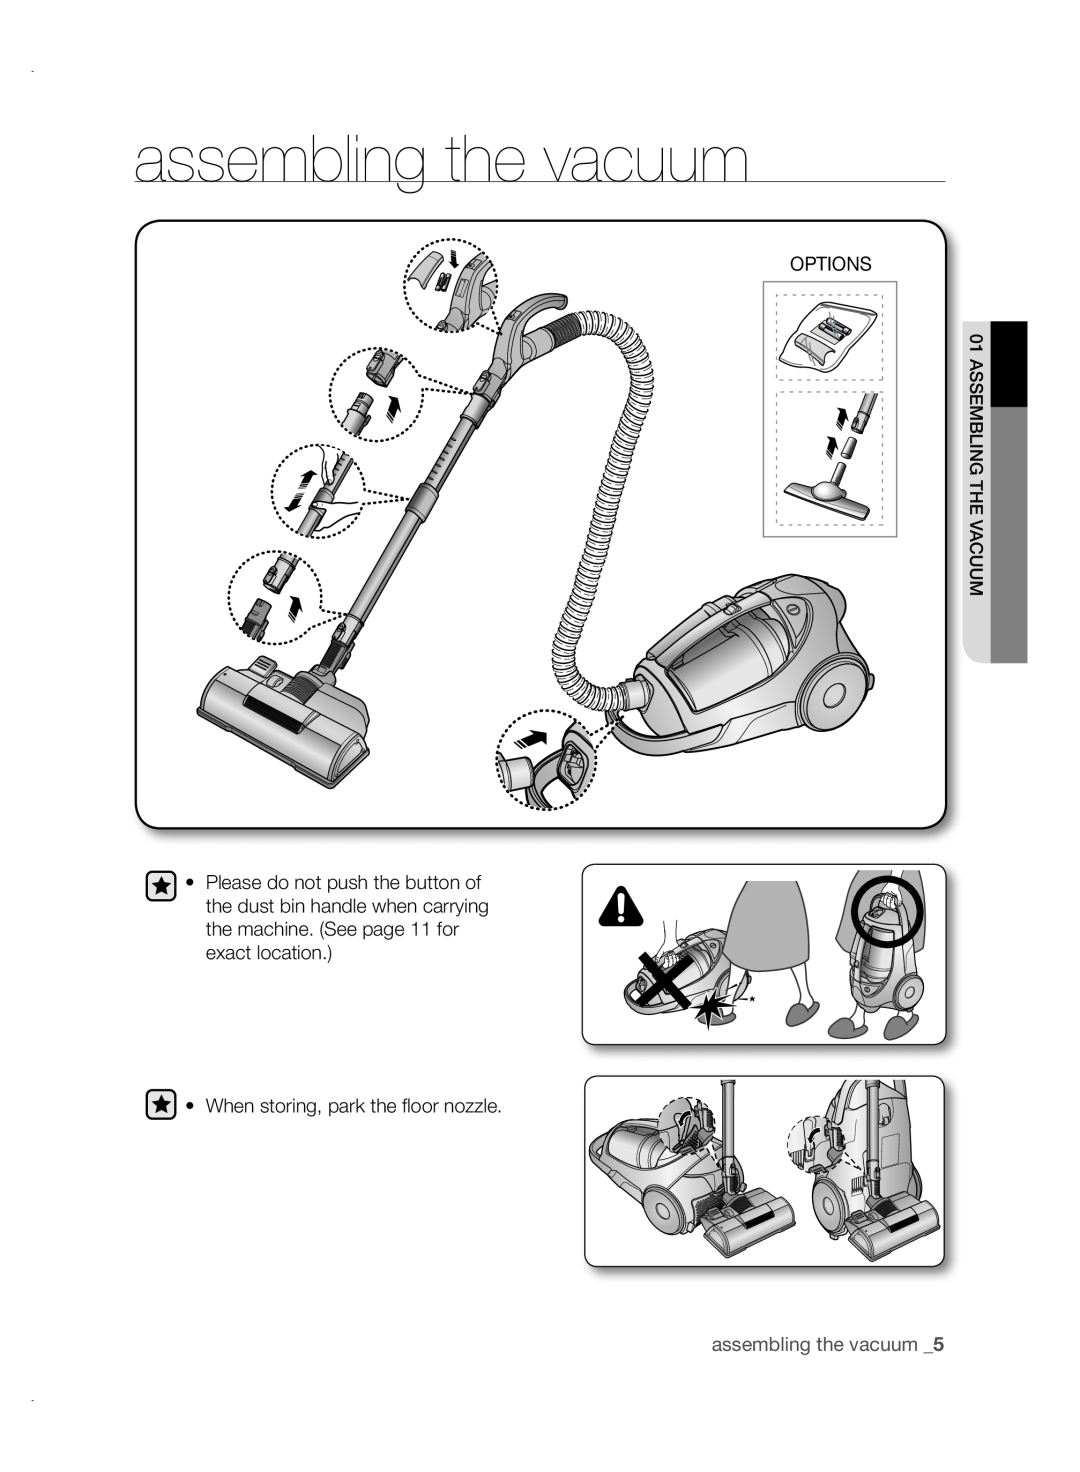 Samsung VCC88P0H1B user manual assembling the vacuum, Options, When storing, park the ﬂ oor nozzle 